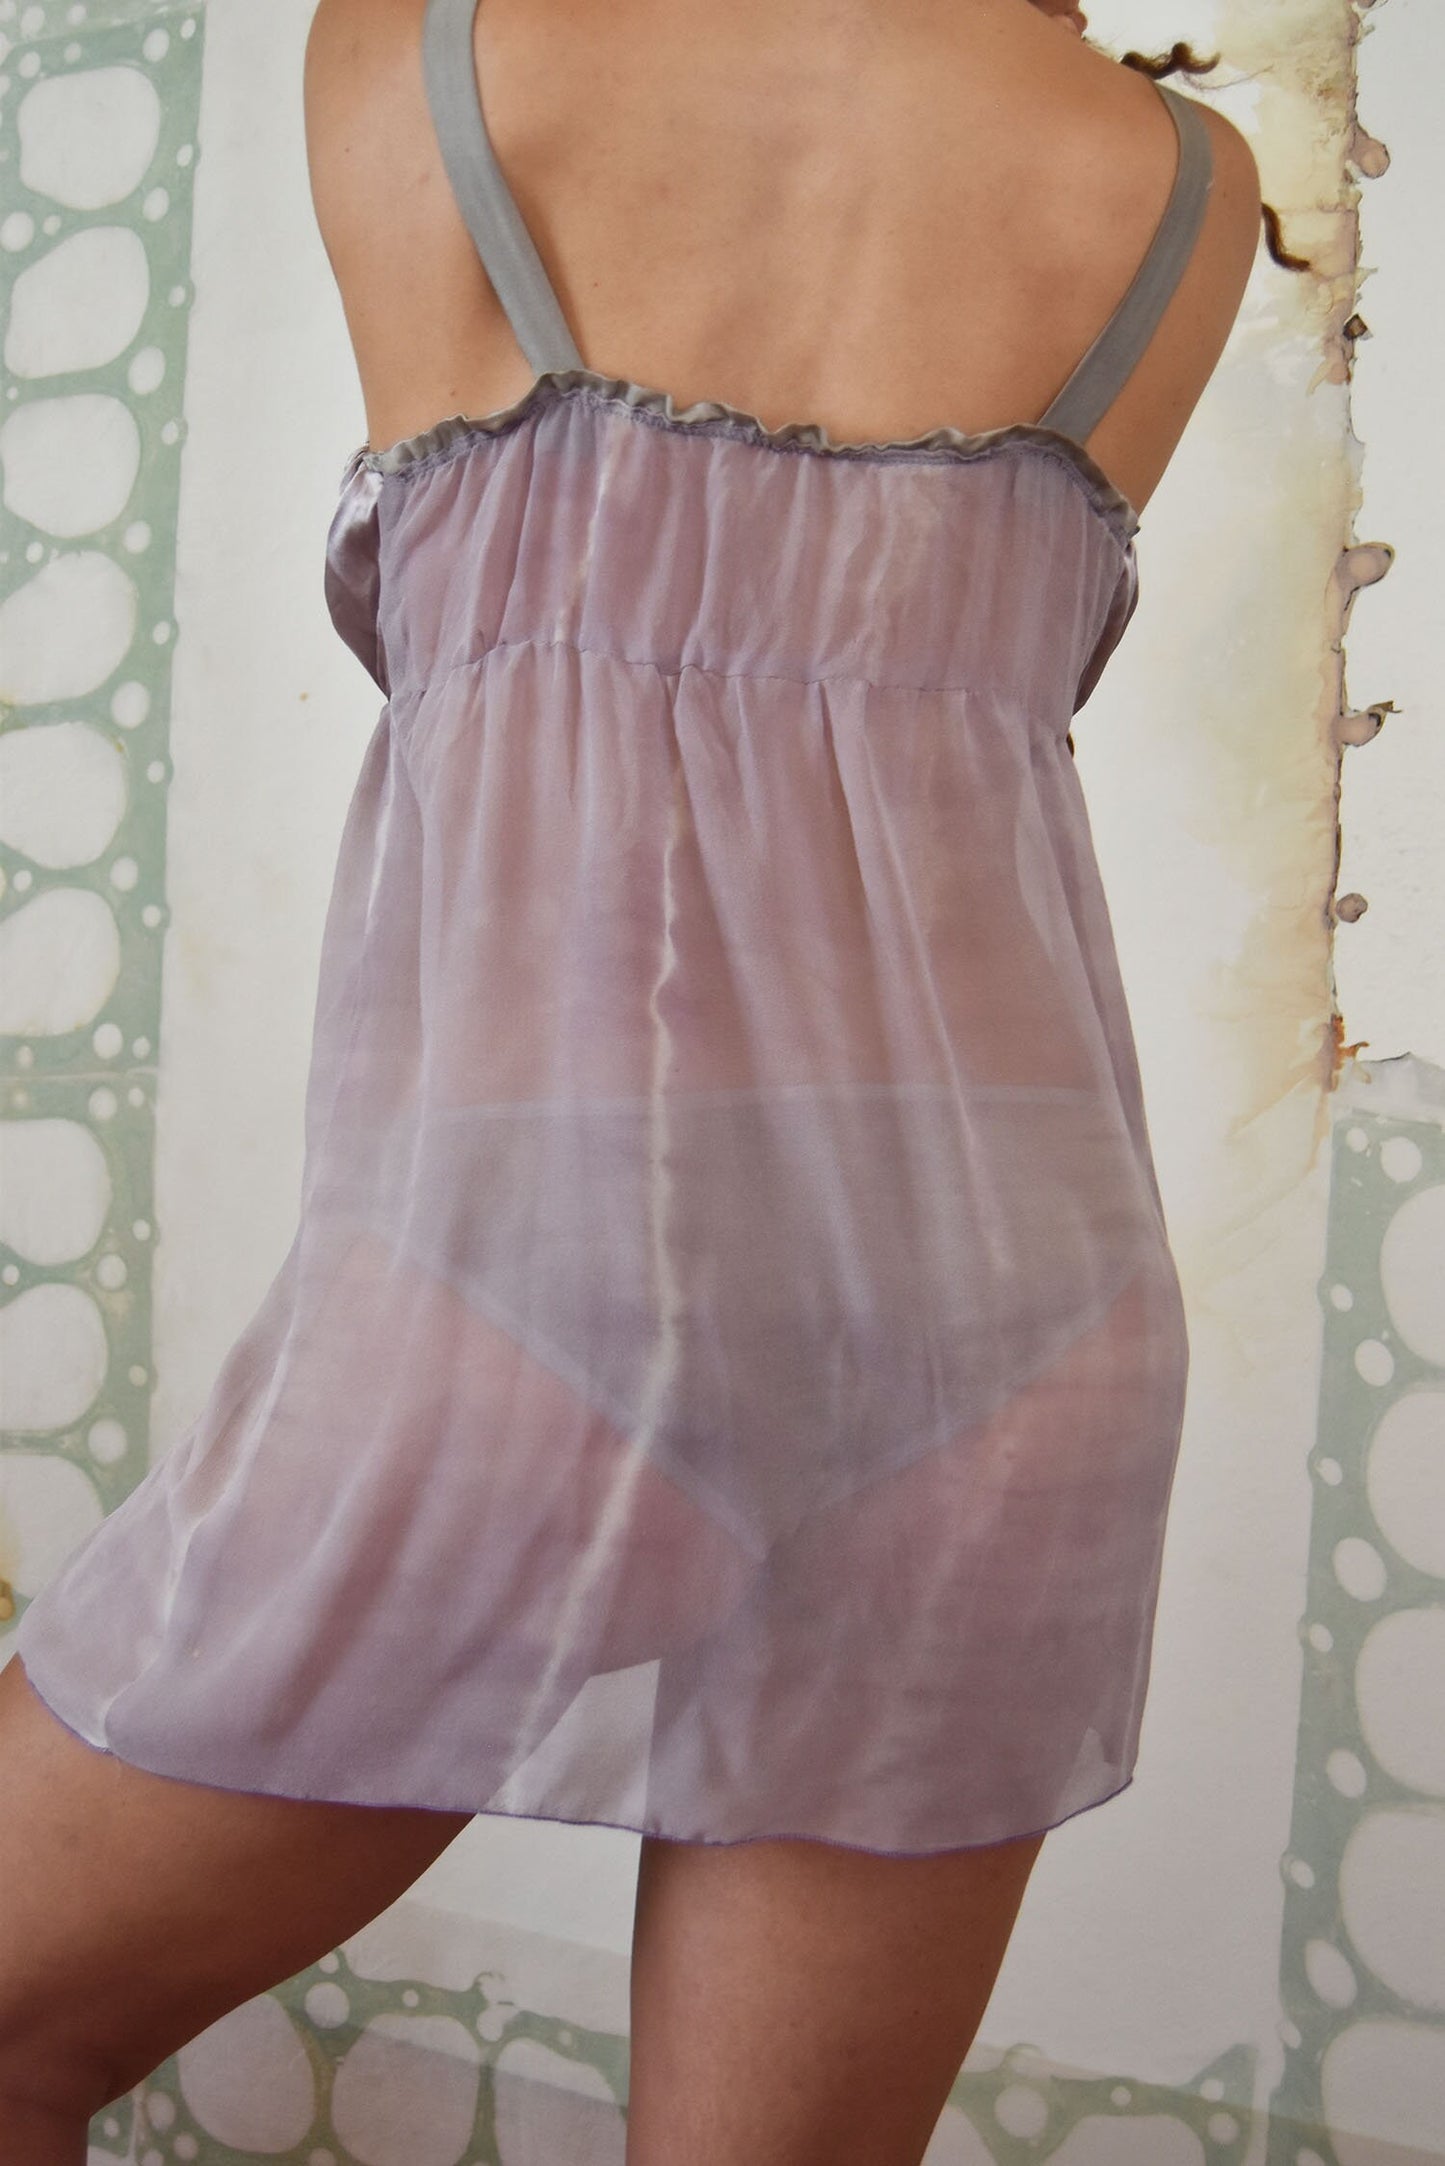 Primrose negligee - natural dyed - silk - lingerie